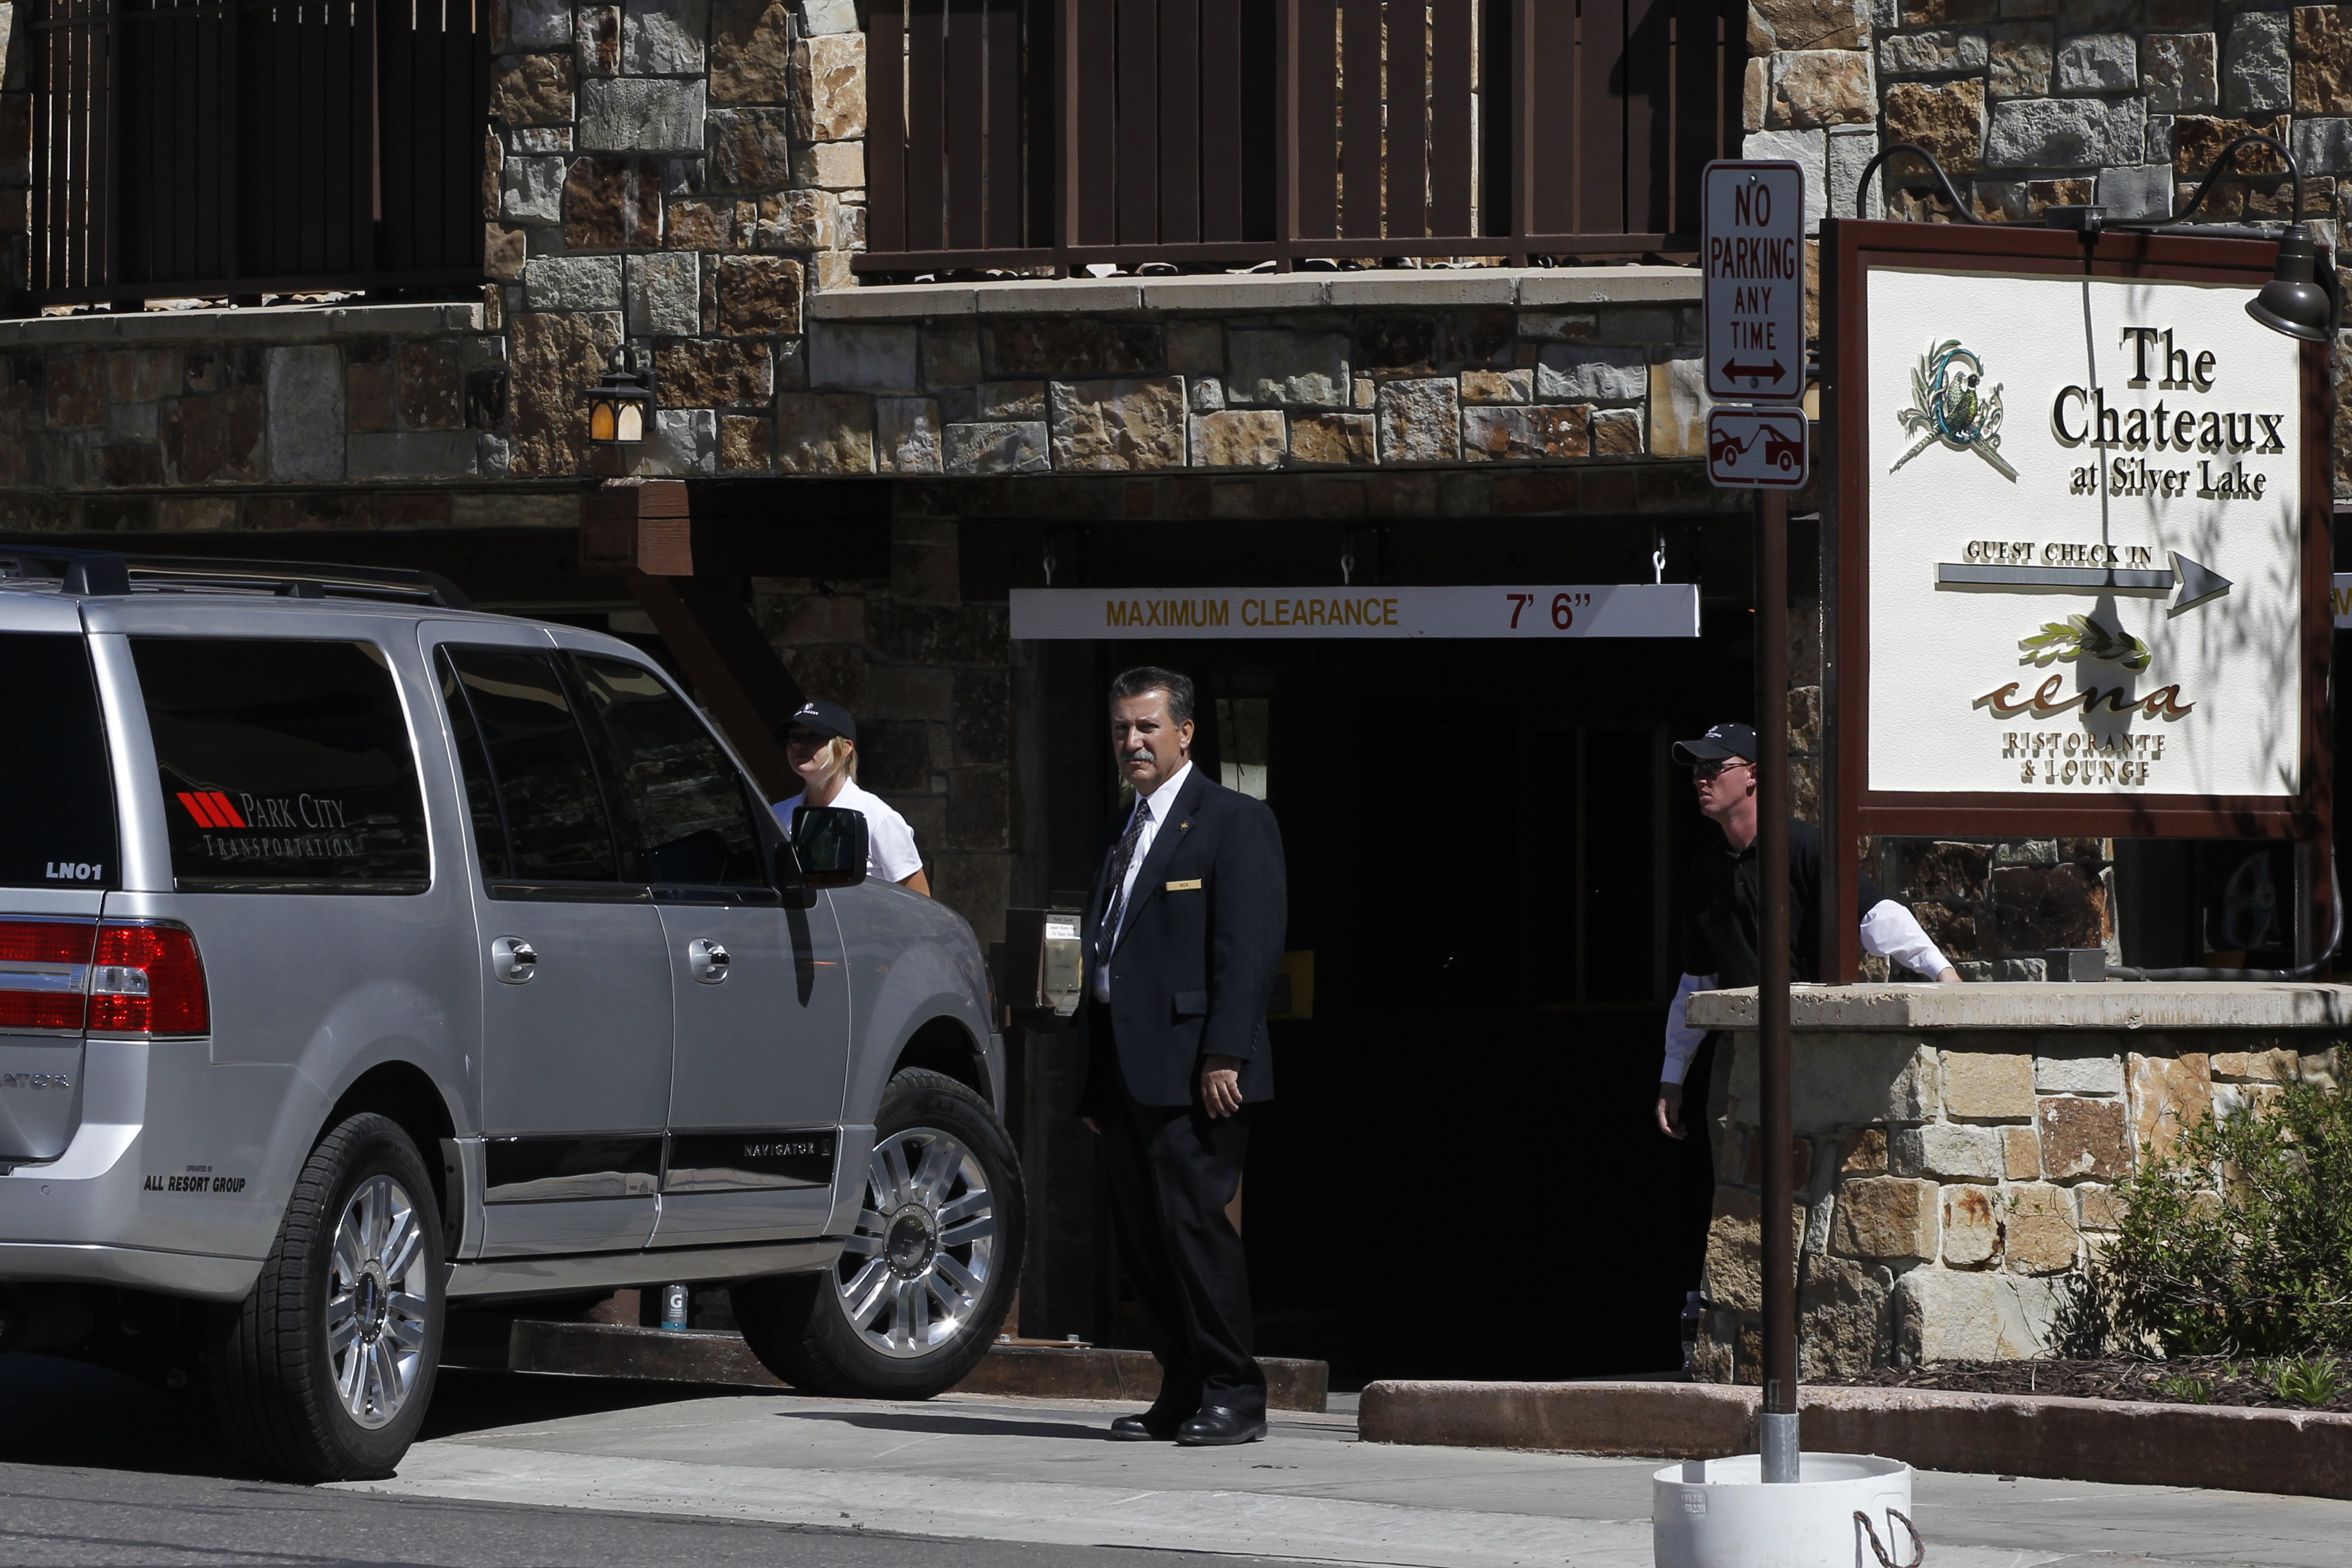 Security officials stand watch as cars enter a garage at a private 2012 donors' conference for Republican presidential candidate Mitt Romney at The Chateaux at Silver Lake at Deer Valley Resort in Park City, Utah. (Charles Dharapak—AP)